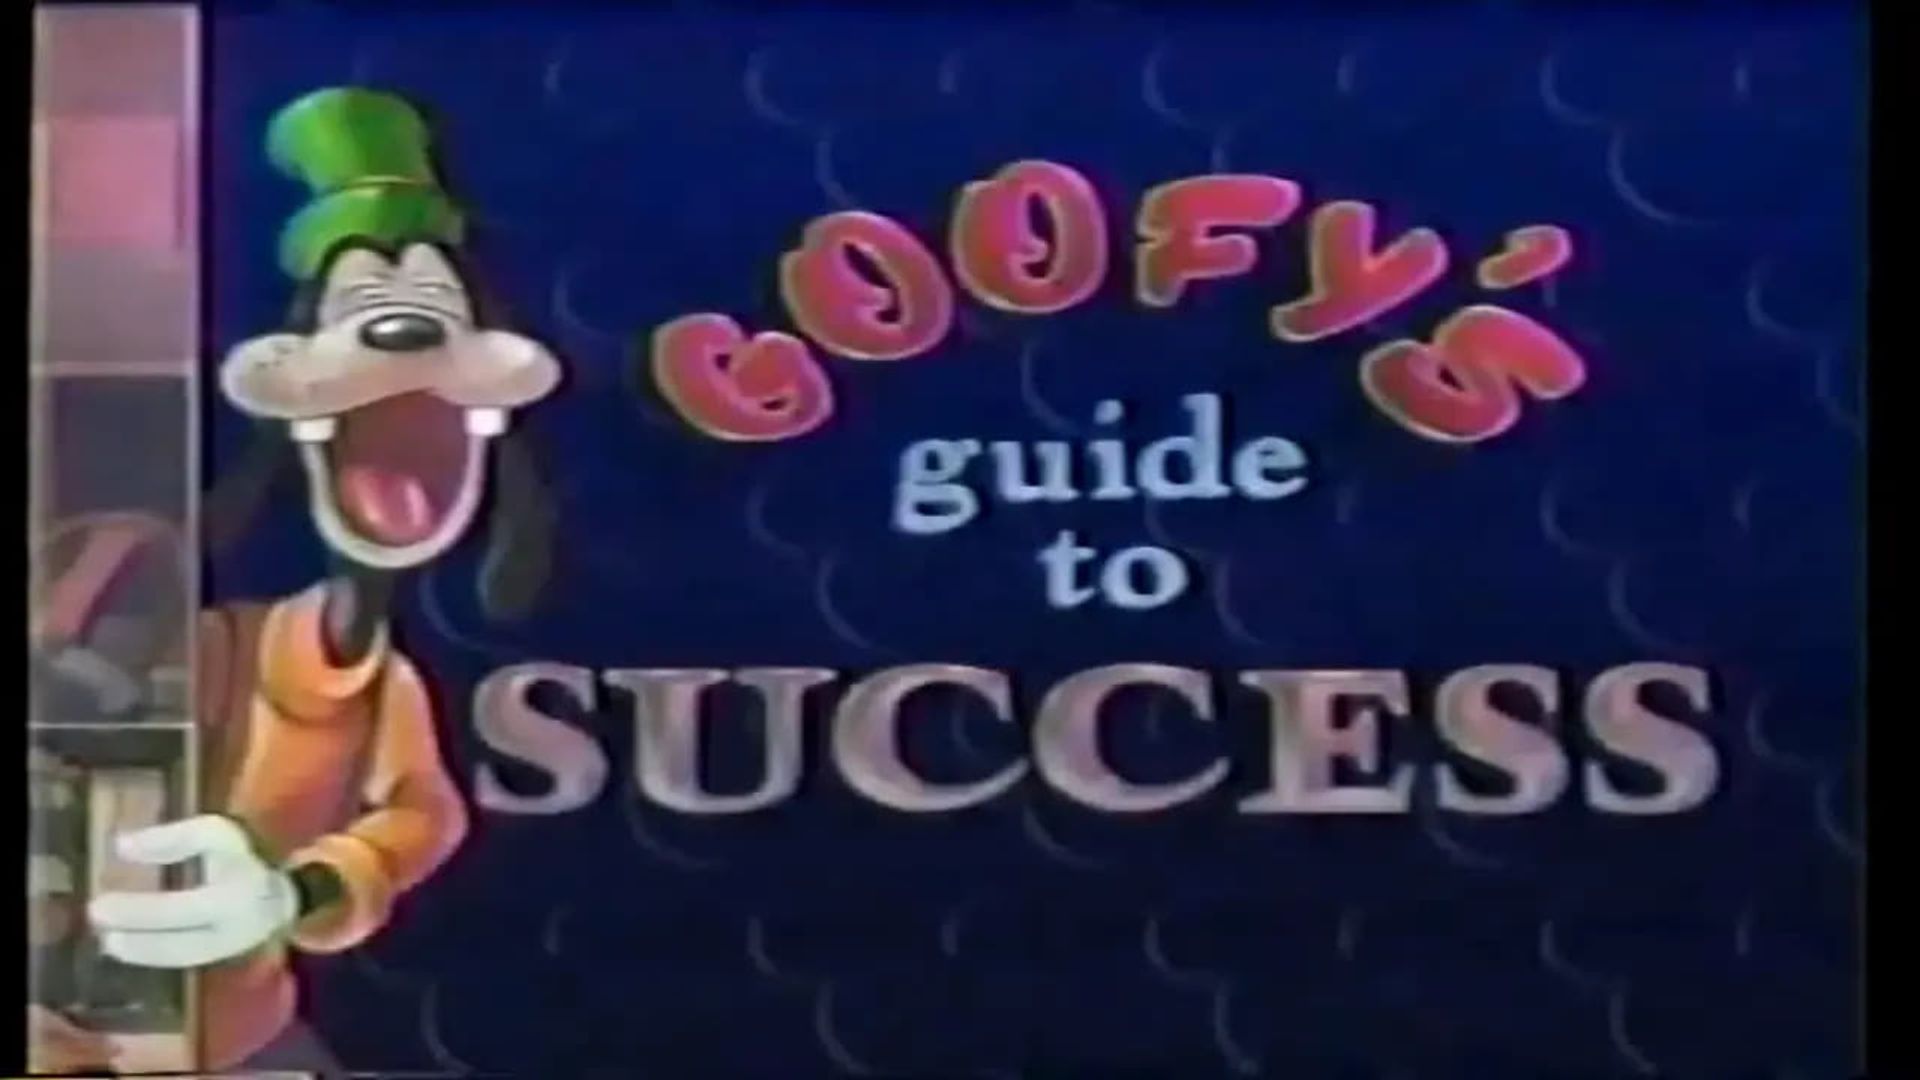 Goofy's Guide to Success background